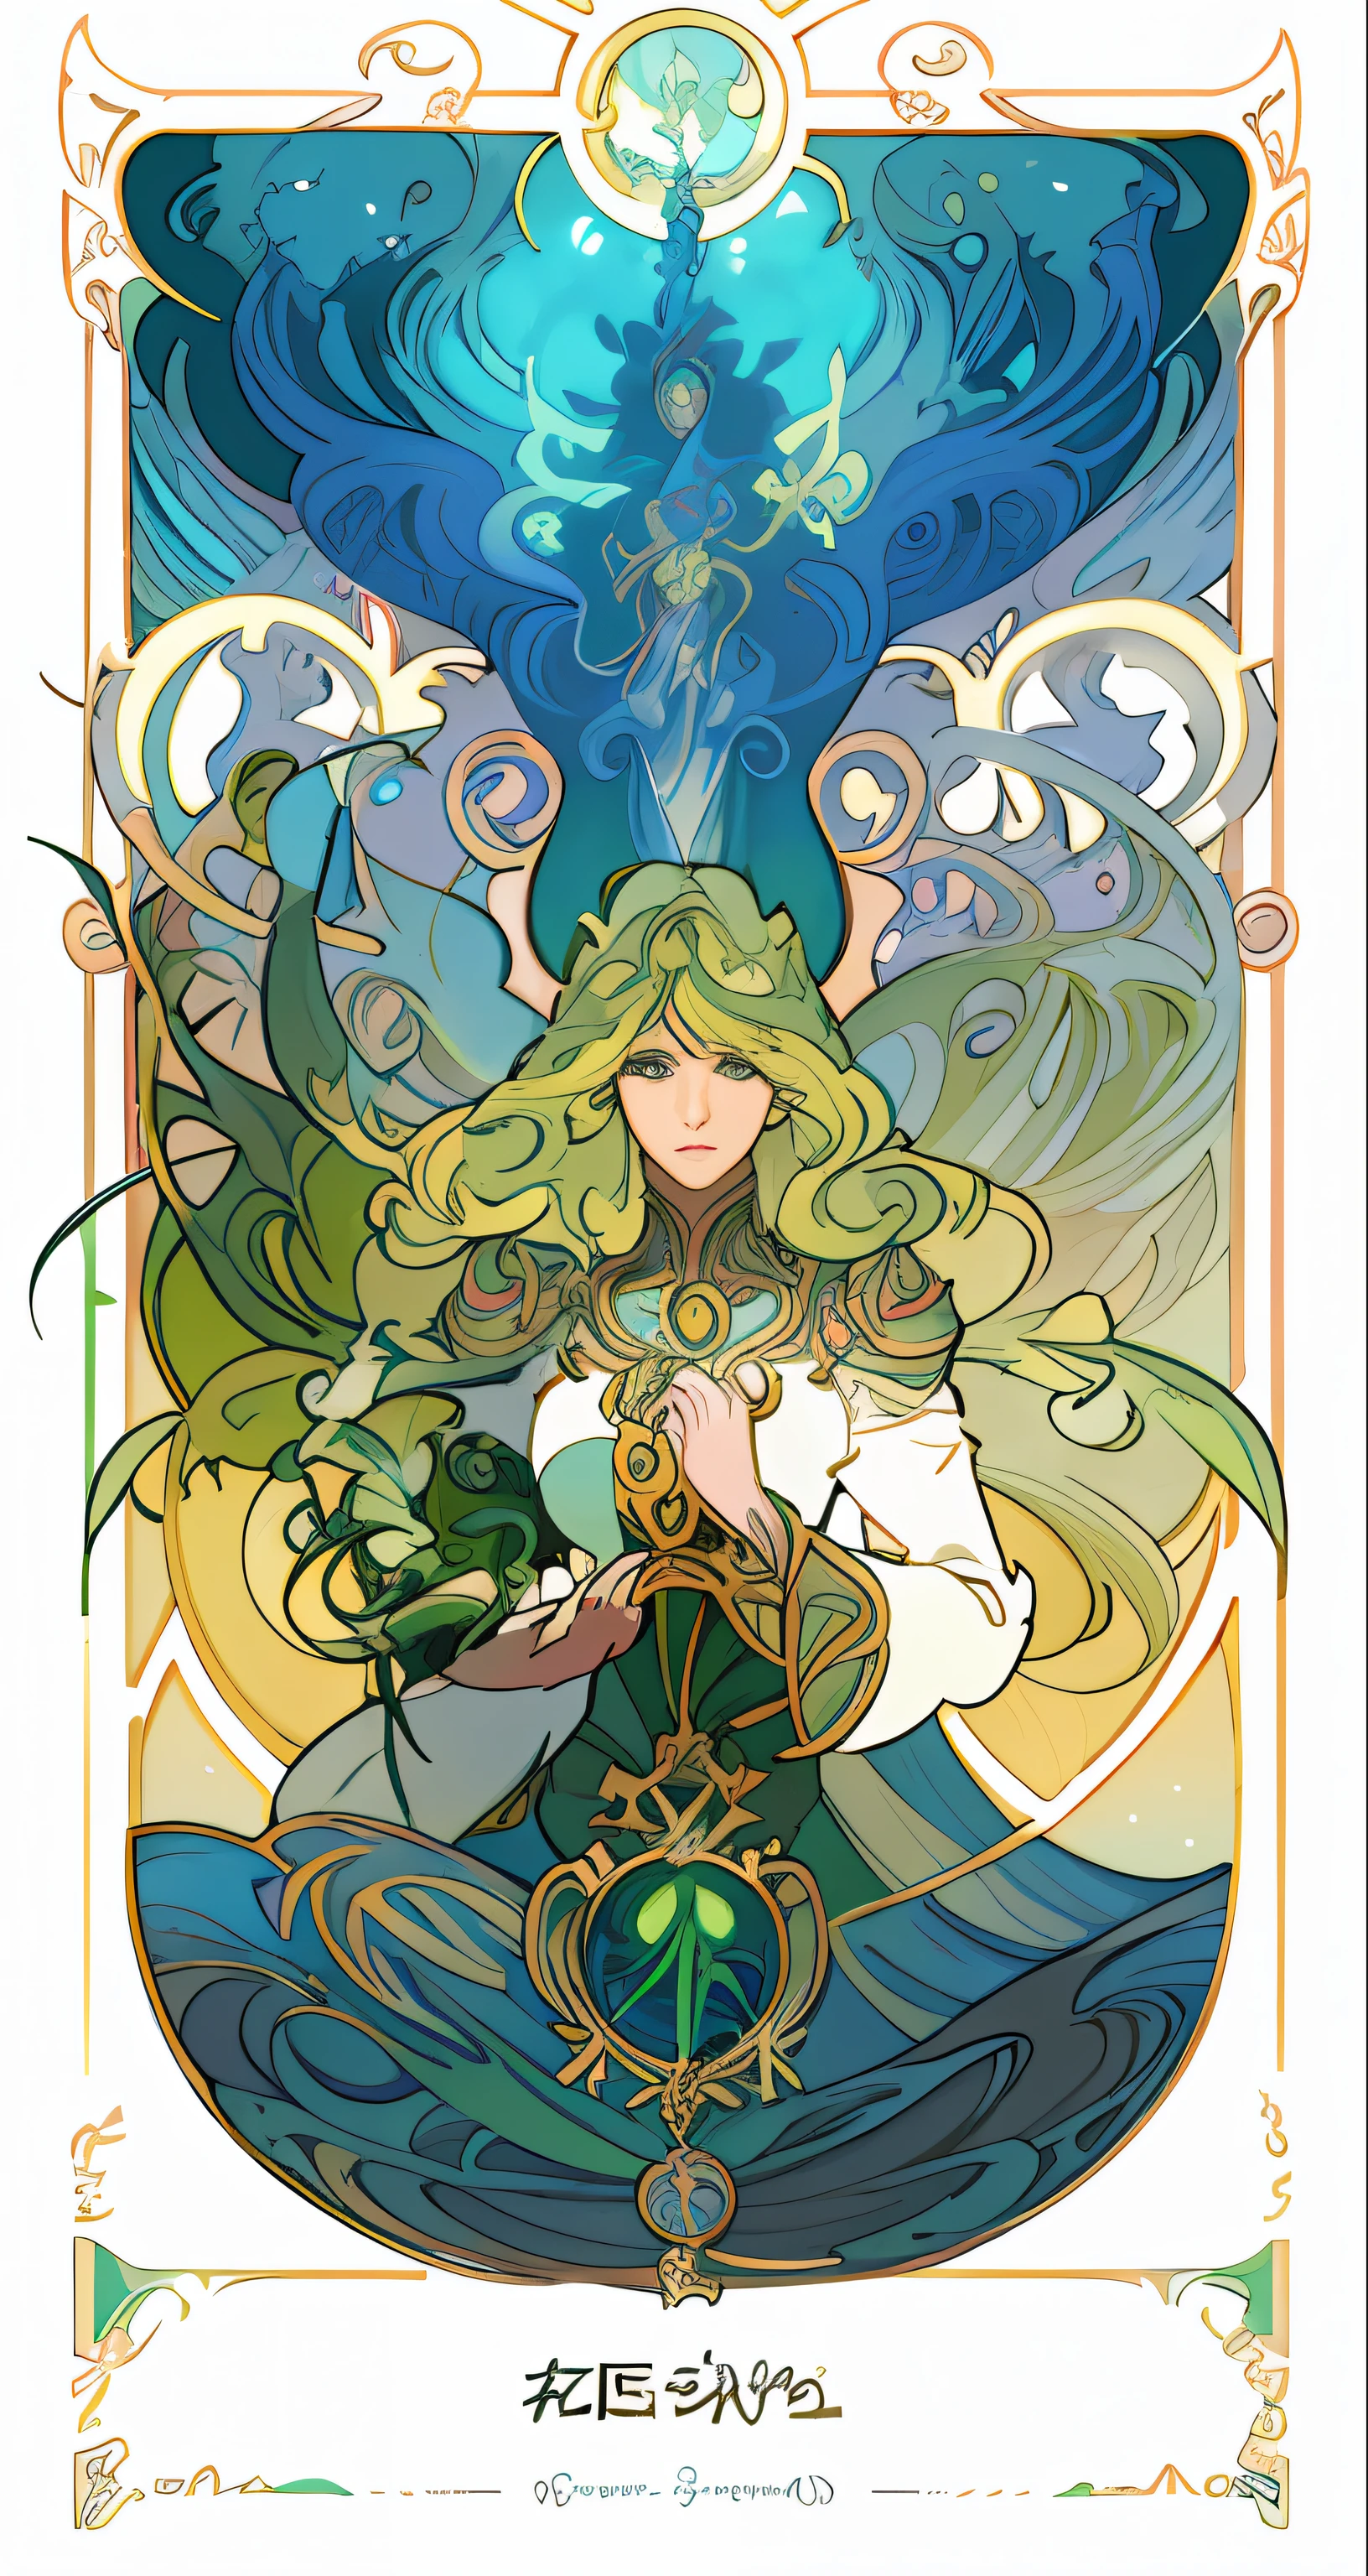 a drawing of a woman with a green hair and a green cape holding a light, alphonse mucha and rossdraws, in the art style of mohrbacher, anime art nouveau, trending on artstation pixiv, full art illustration, anime fantasy illustration, magic the gathering art style, digital 2d fantasy art, mucha. art nouveau. gloomhaven